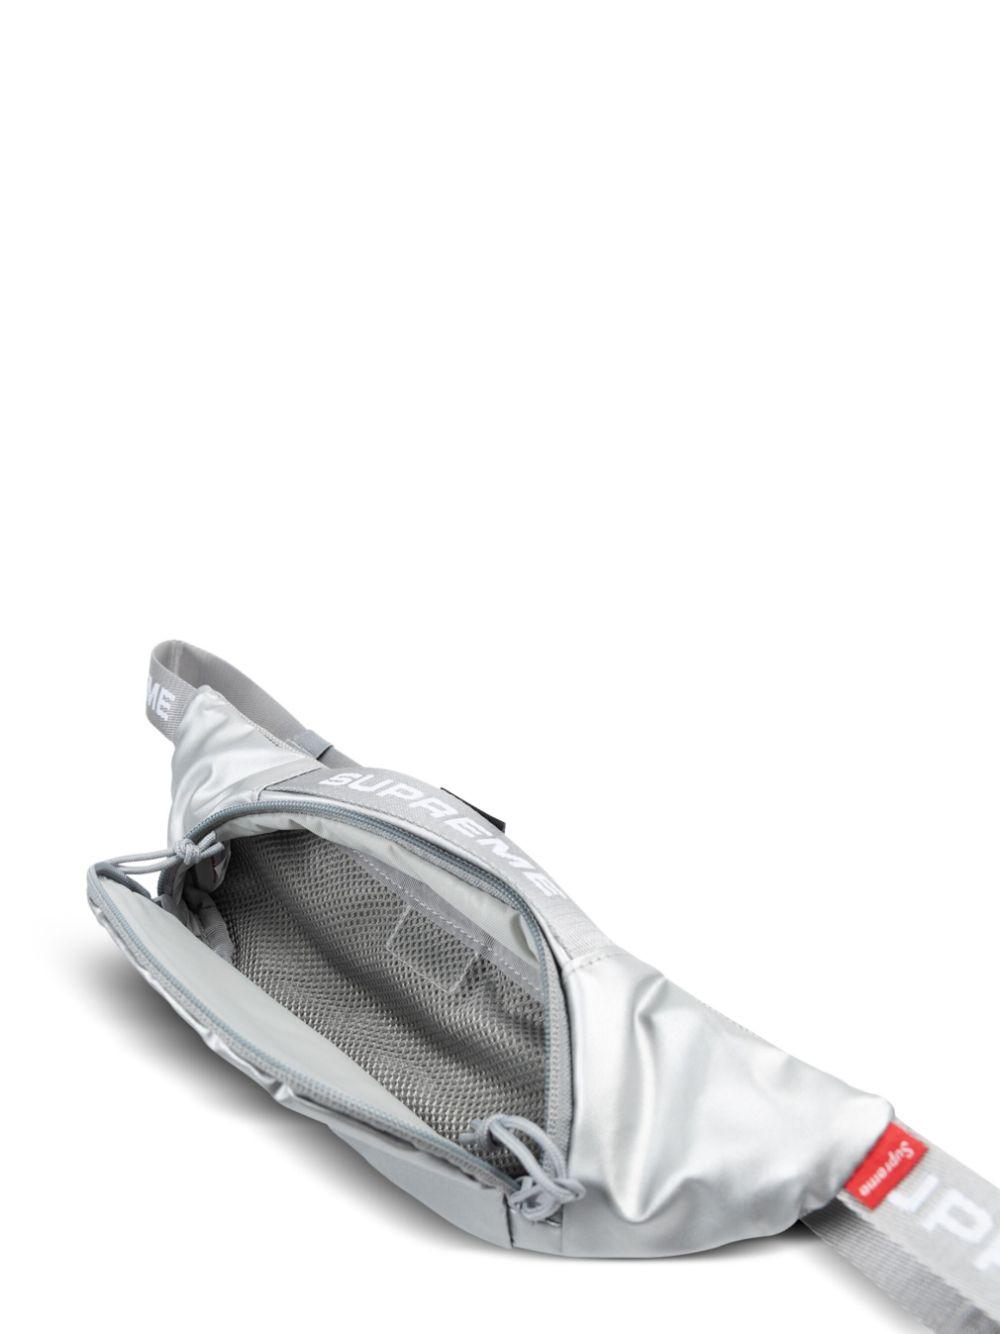 Supreme Small Waist Bag in White | Lyst